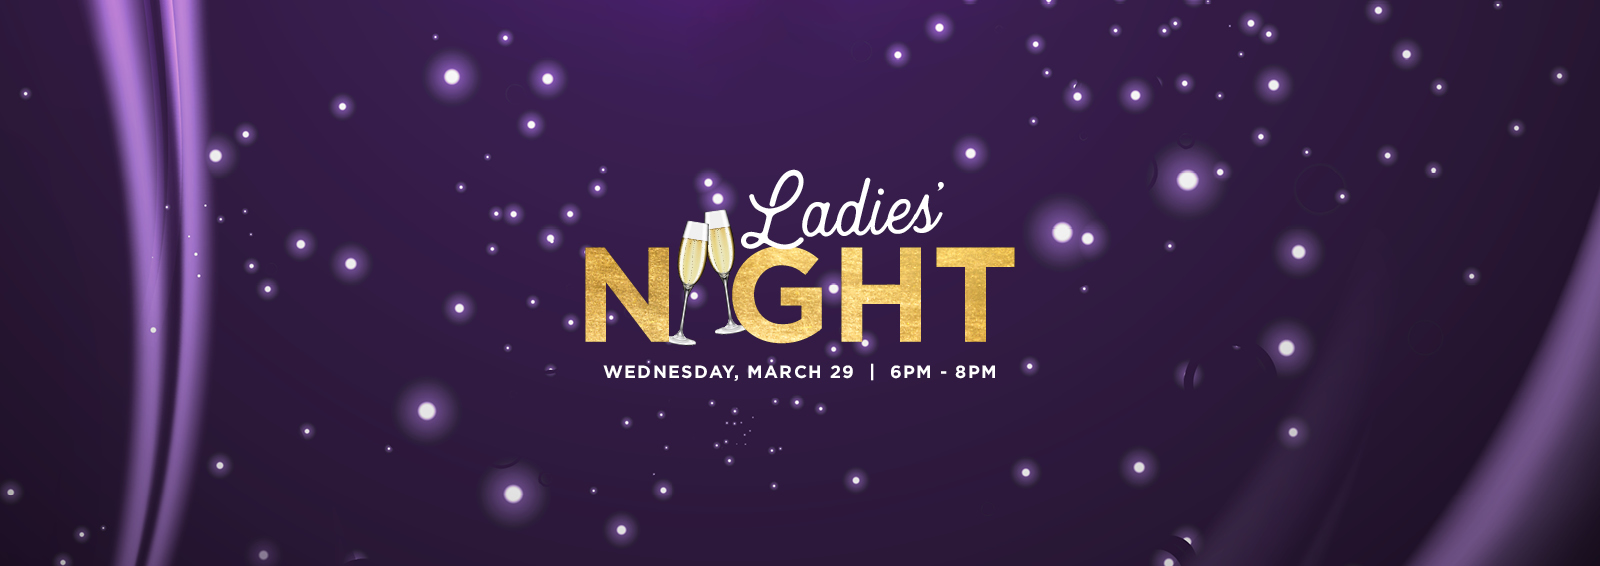 Ladies Night Wednesday, March 29 from 6PM-8PM